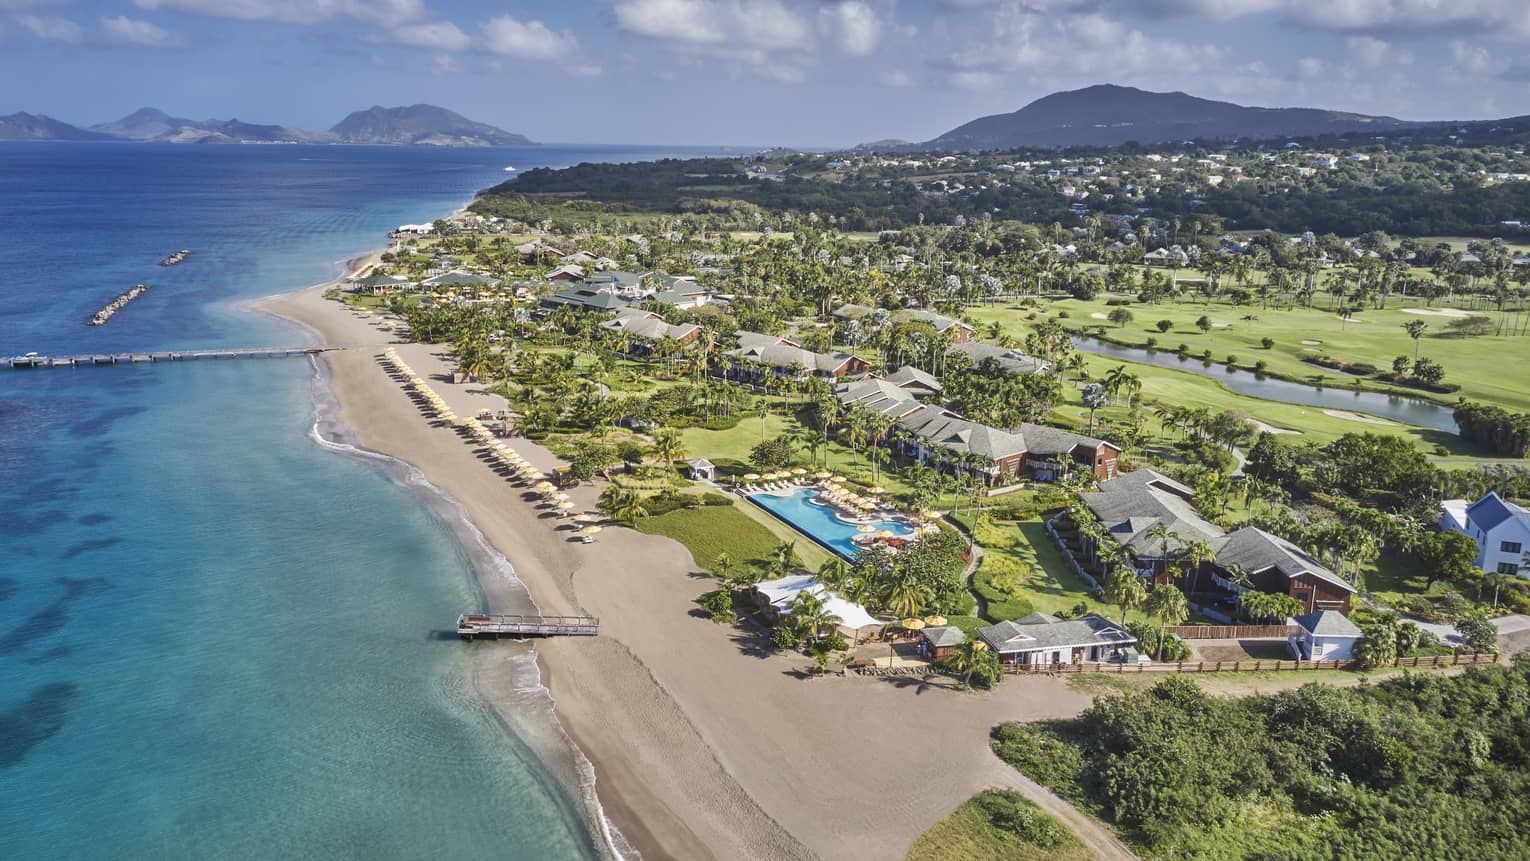 Aerial view of a resort property on a beach shore.